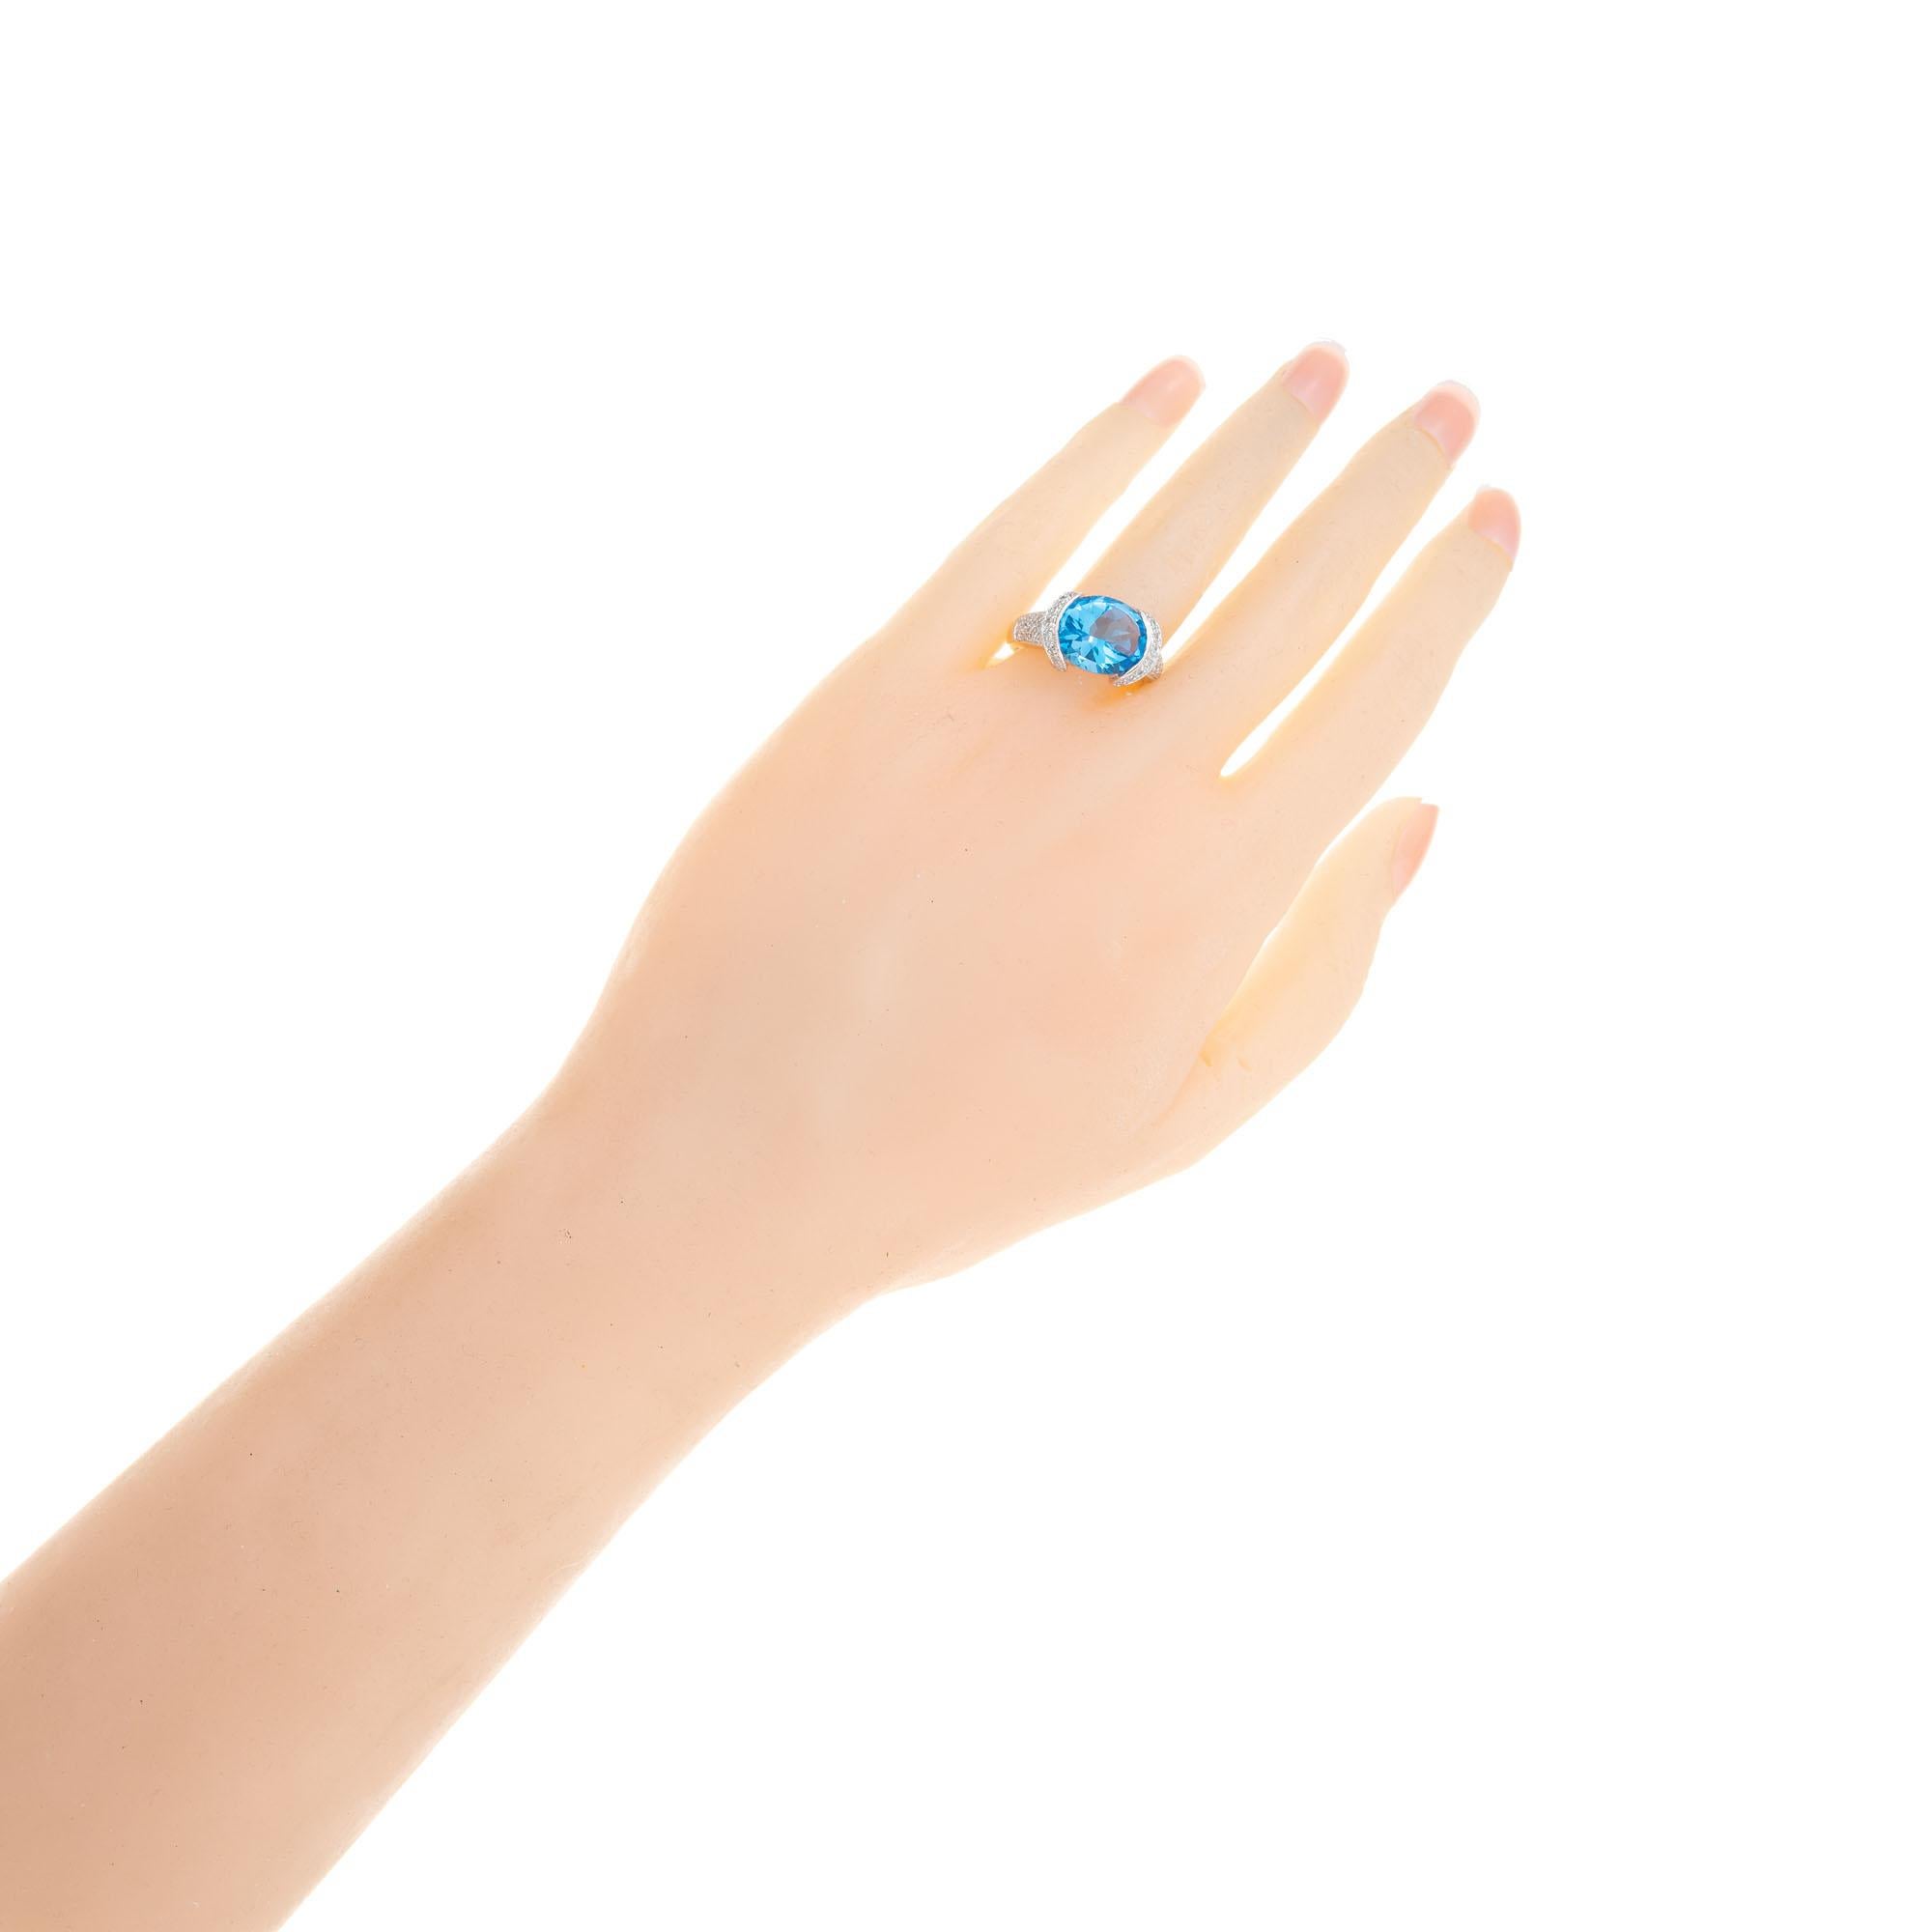 4.25 Carat London Blue Topaz White Gold Cocktail Ring For Sale 1